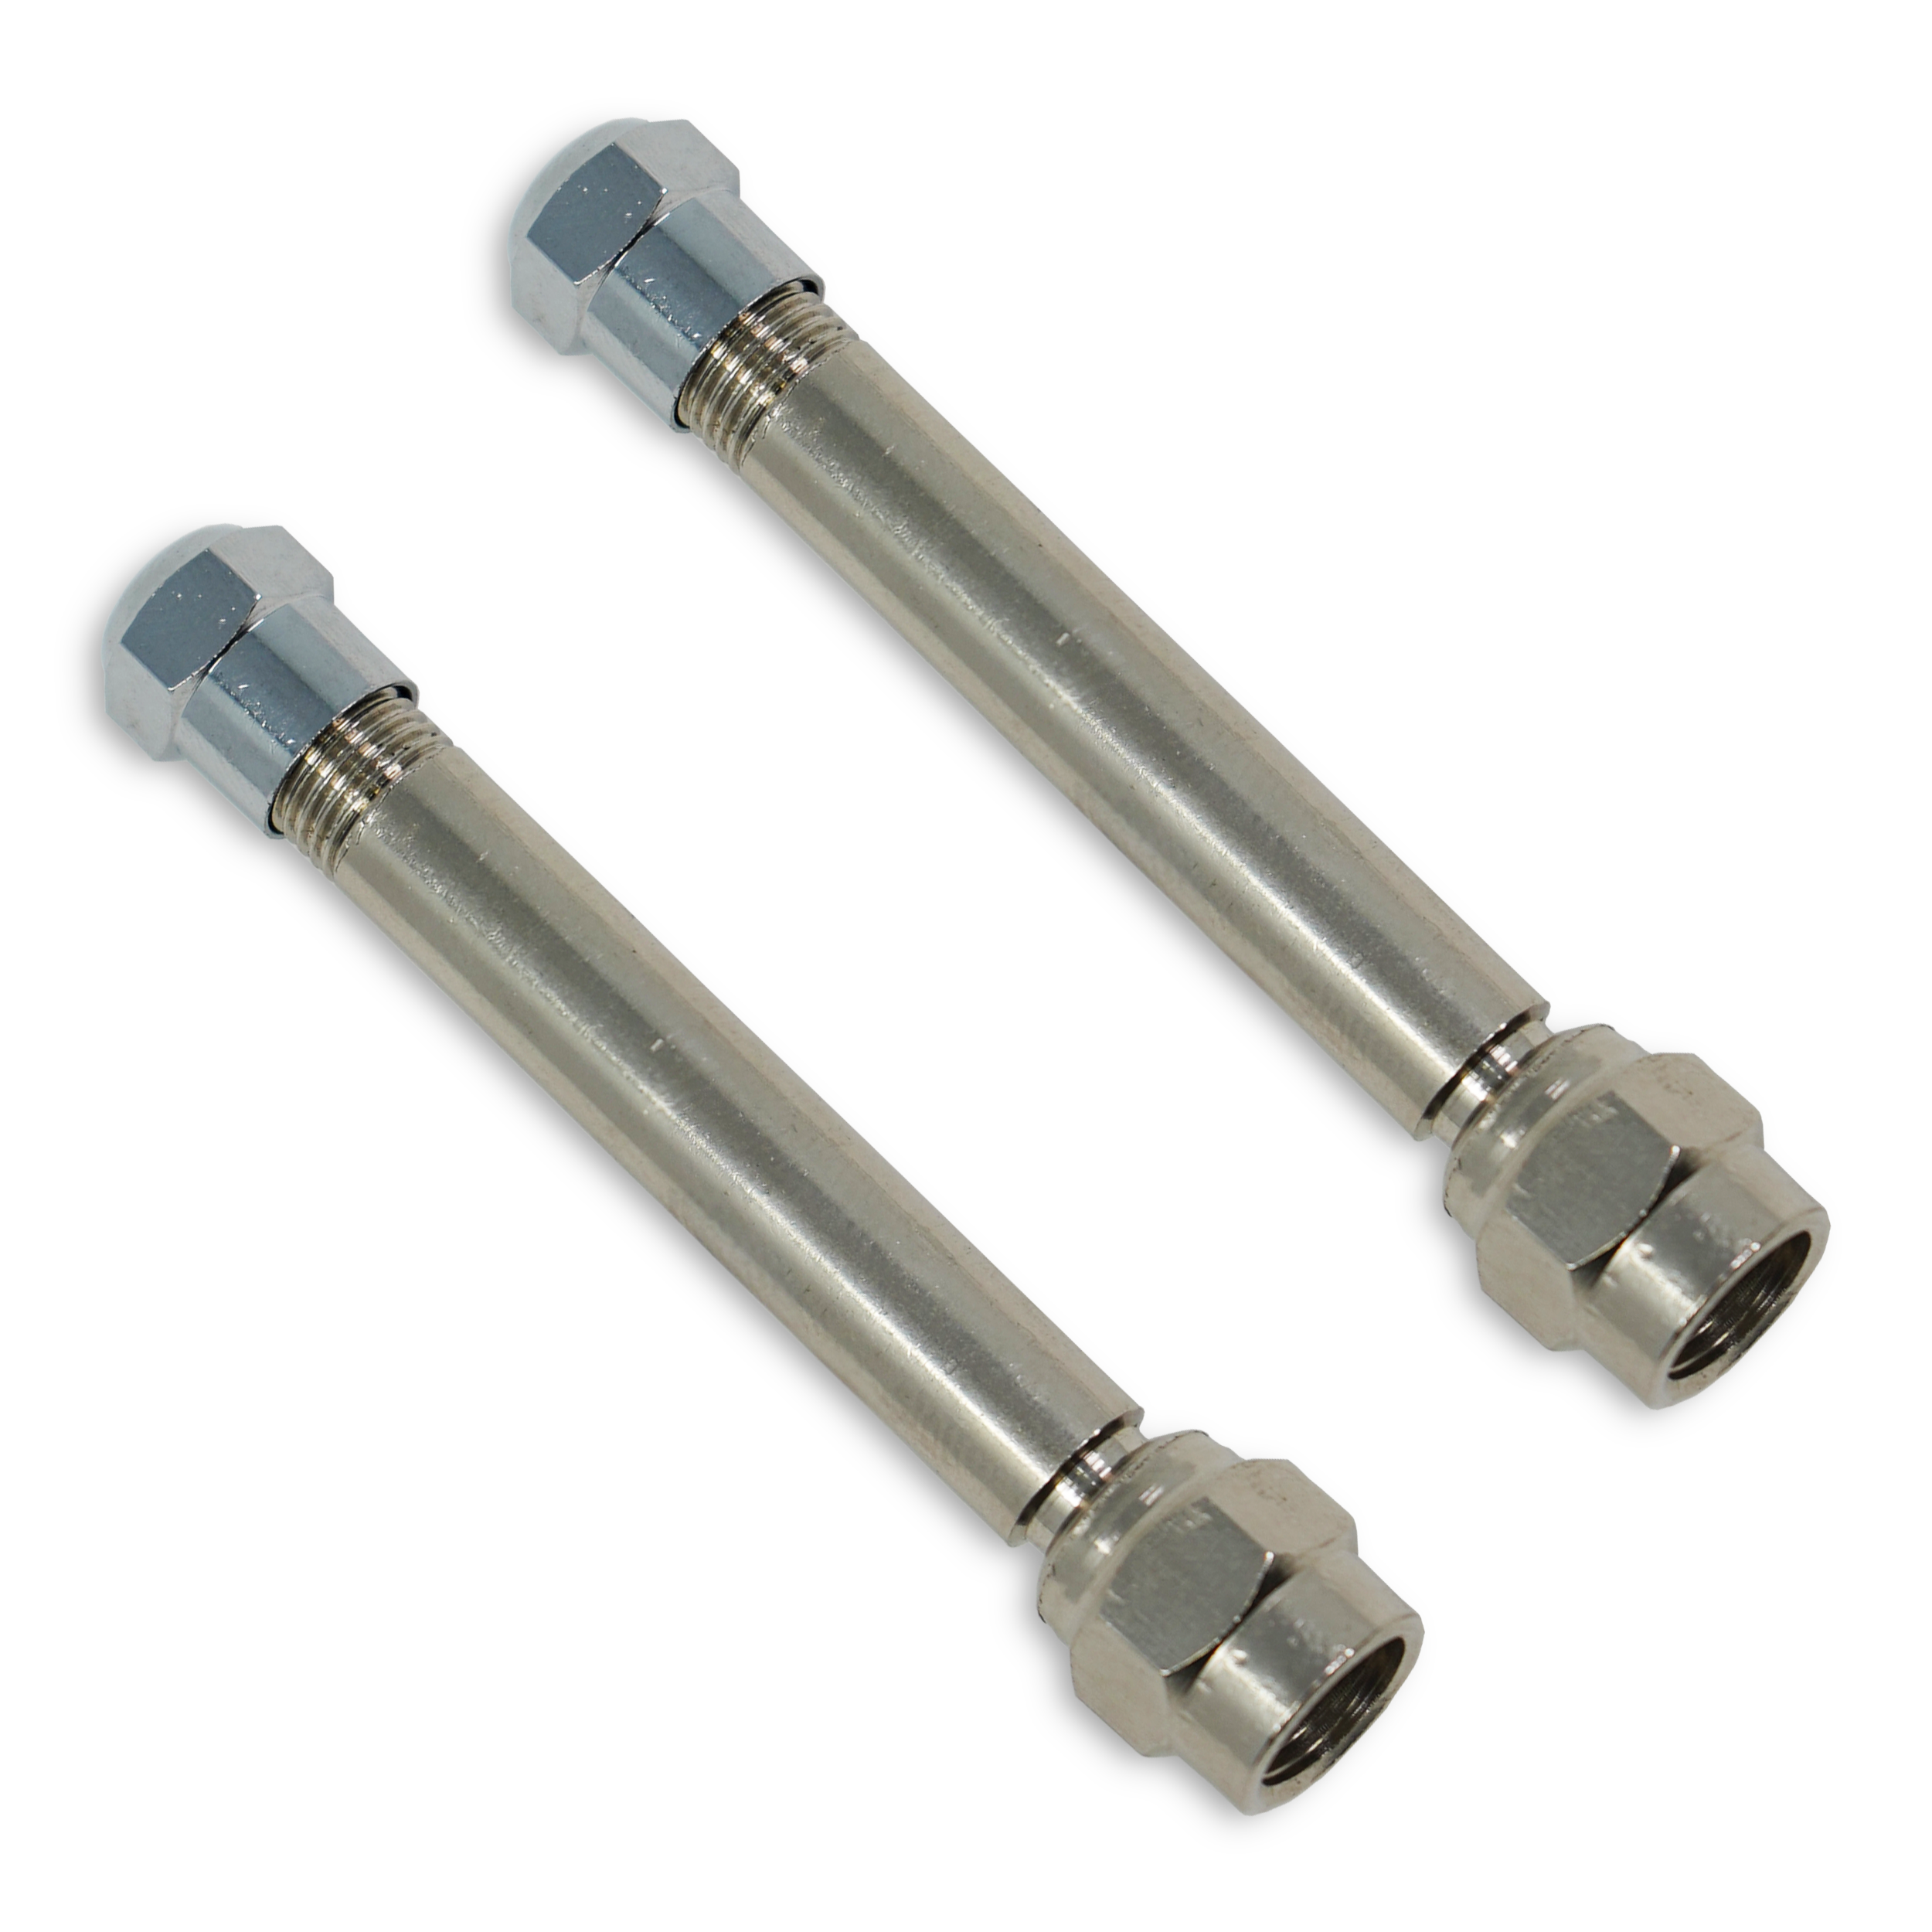 TireMinder 2 Inch Straight Valve Extender, 2 Pack - The OFFICIAL WEBSITE of  Minder Research, Inc. - Home of the TireMinder TPMS, TempMinder and  NightMinder Systems.